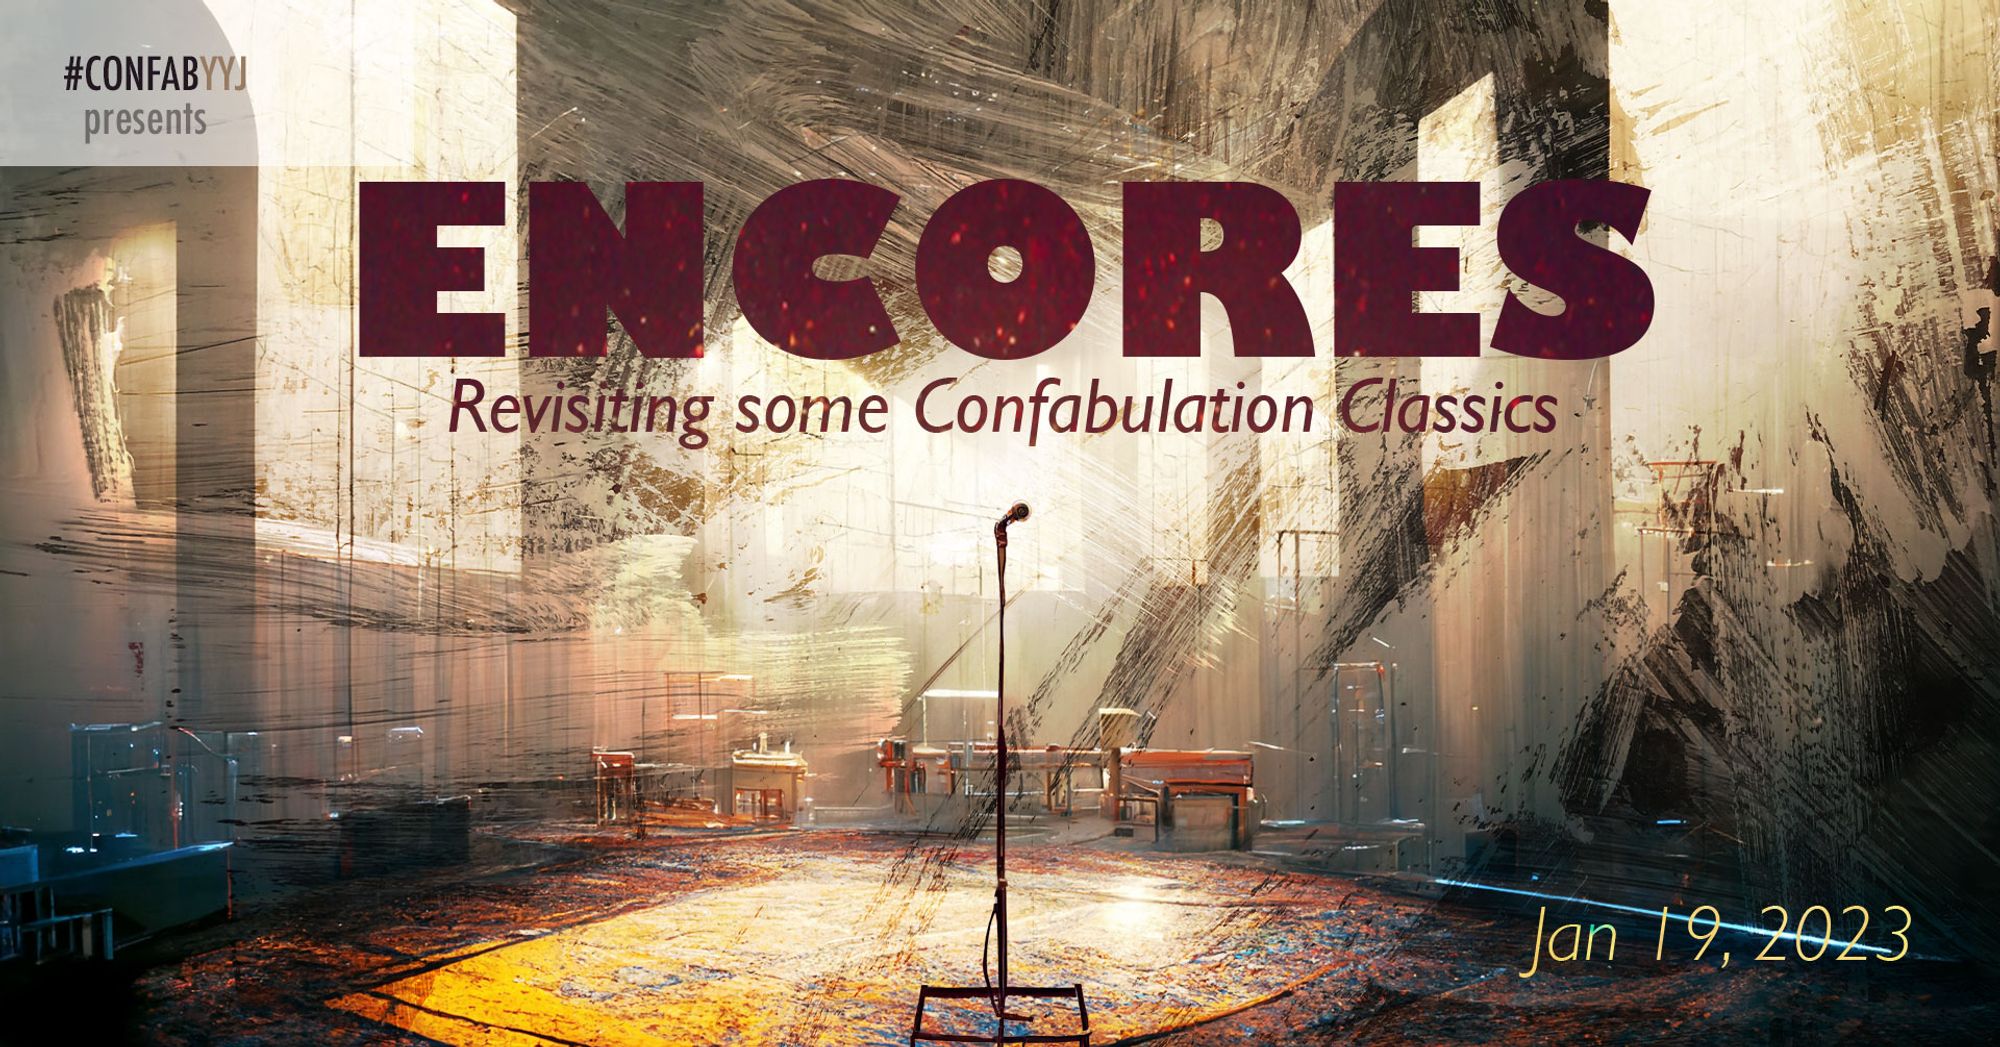 An artistically modified photo of a microphone and stand on a stage with the title of the show "Encores" and the show information appearing on top of the image.